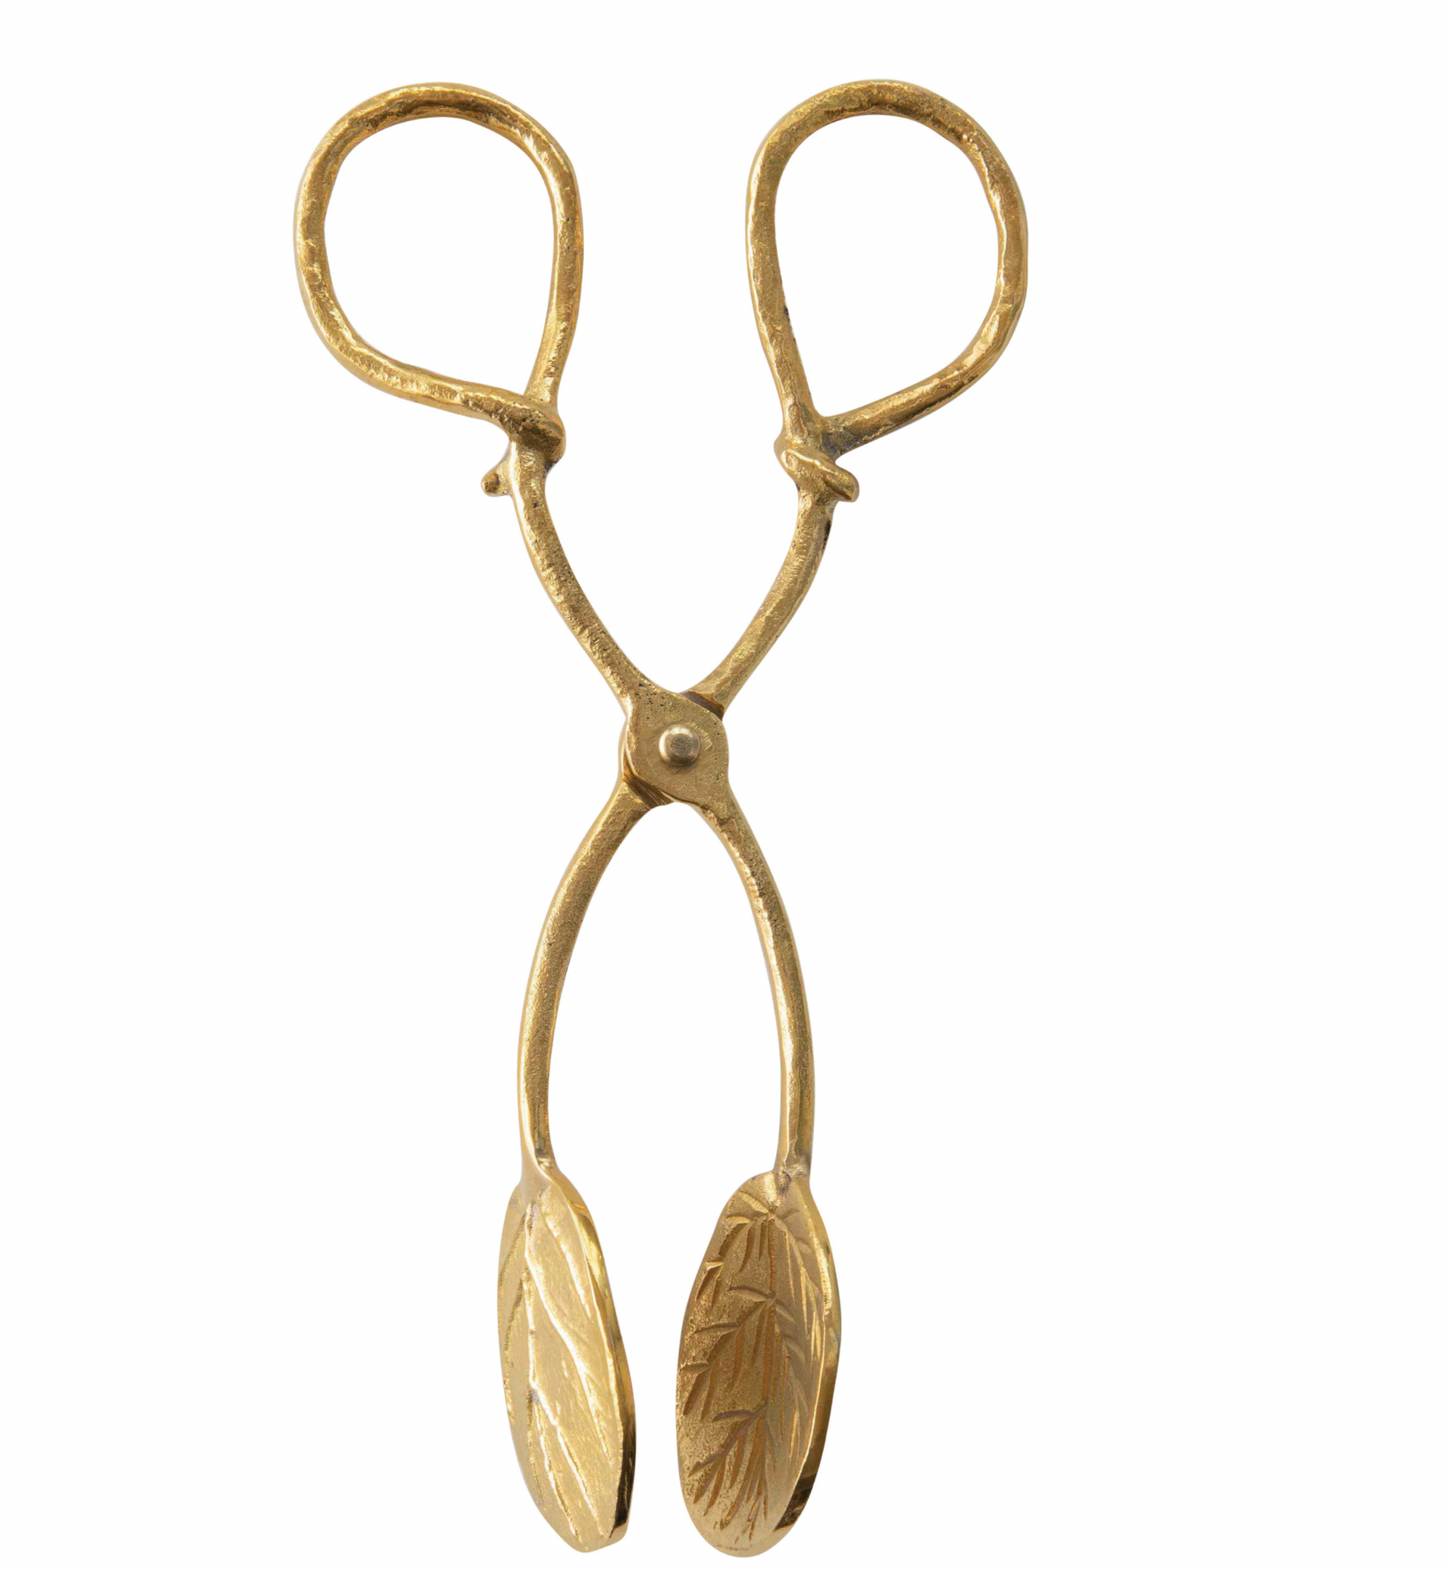 Salad Leaf Tongs in Brass